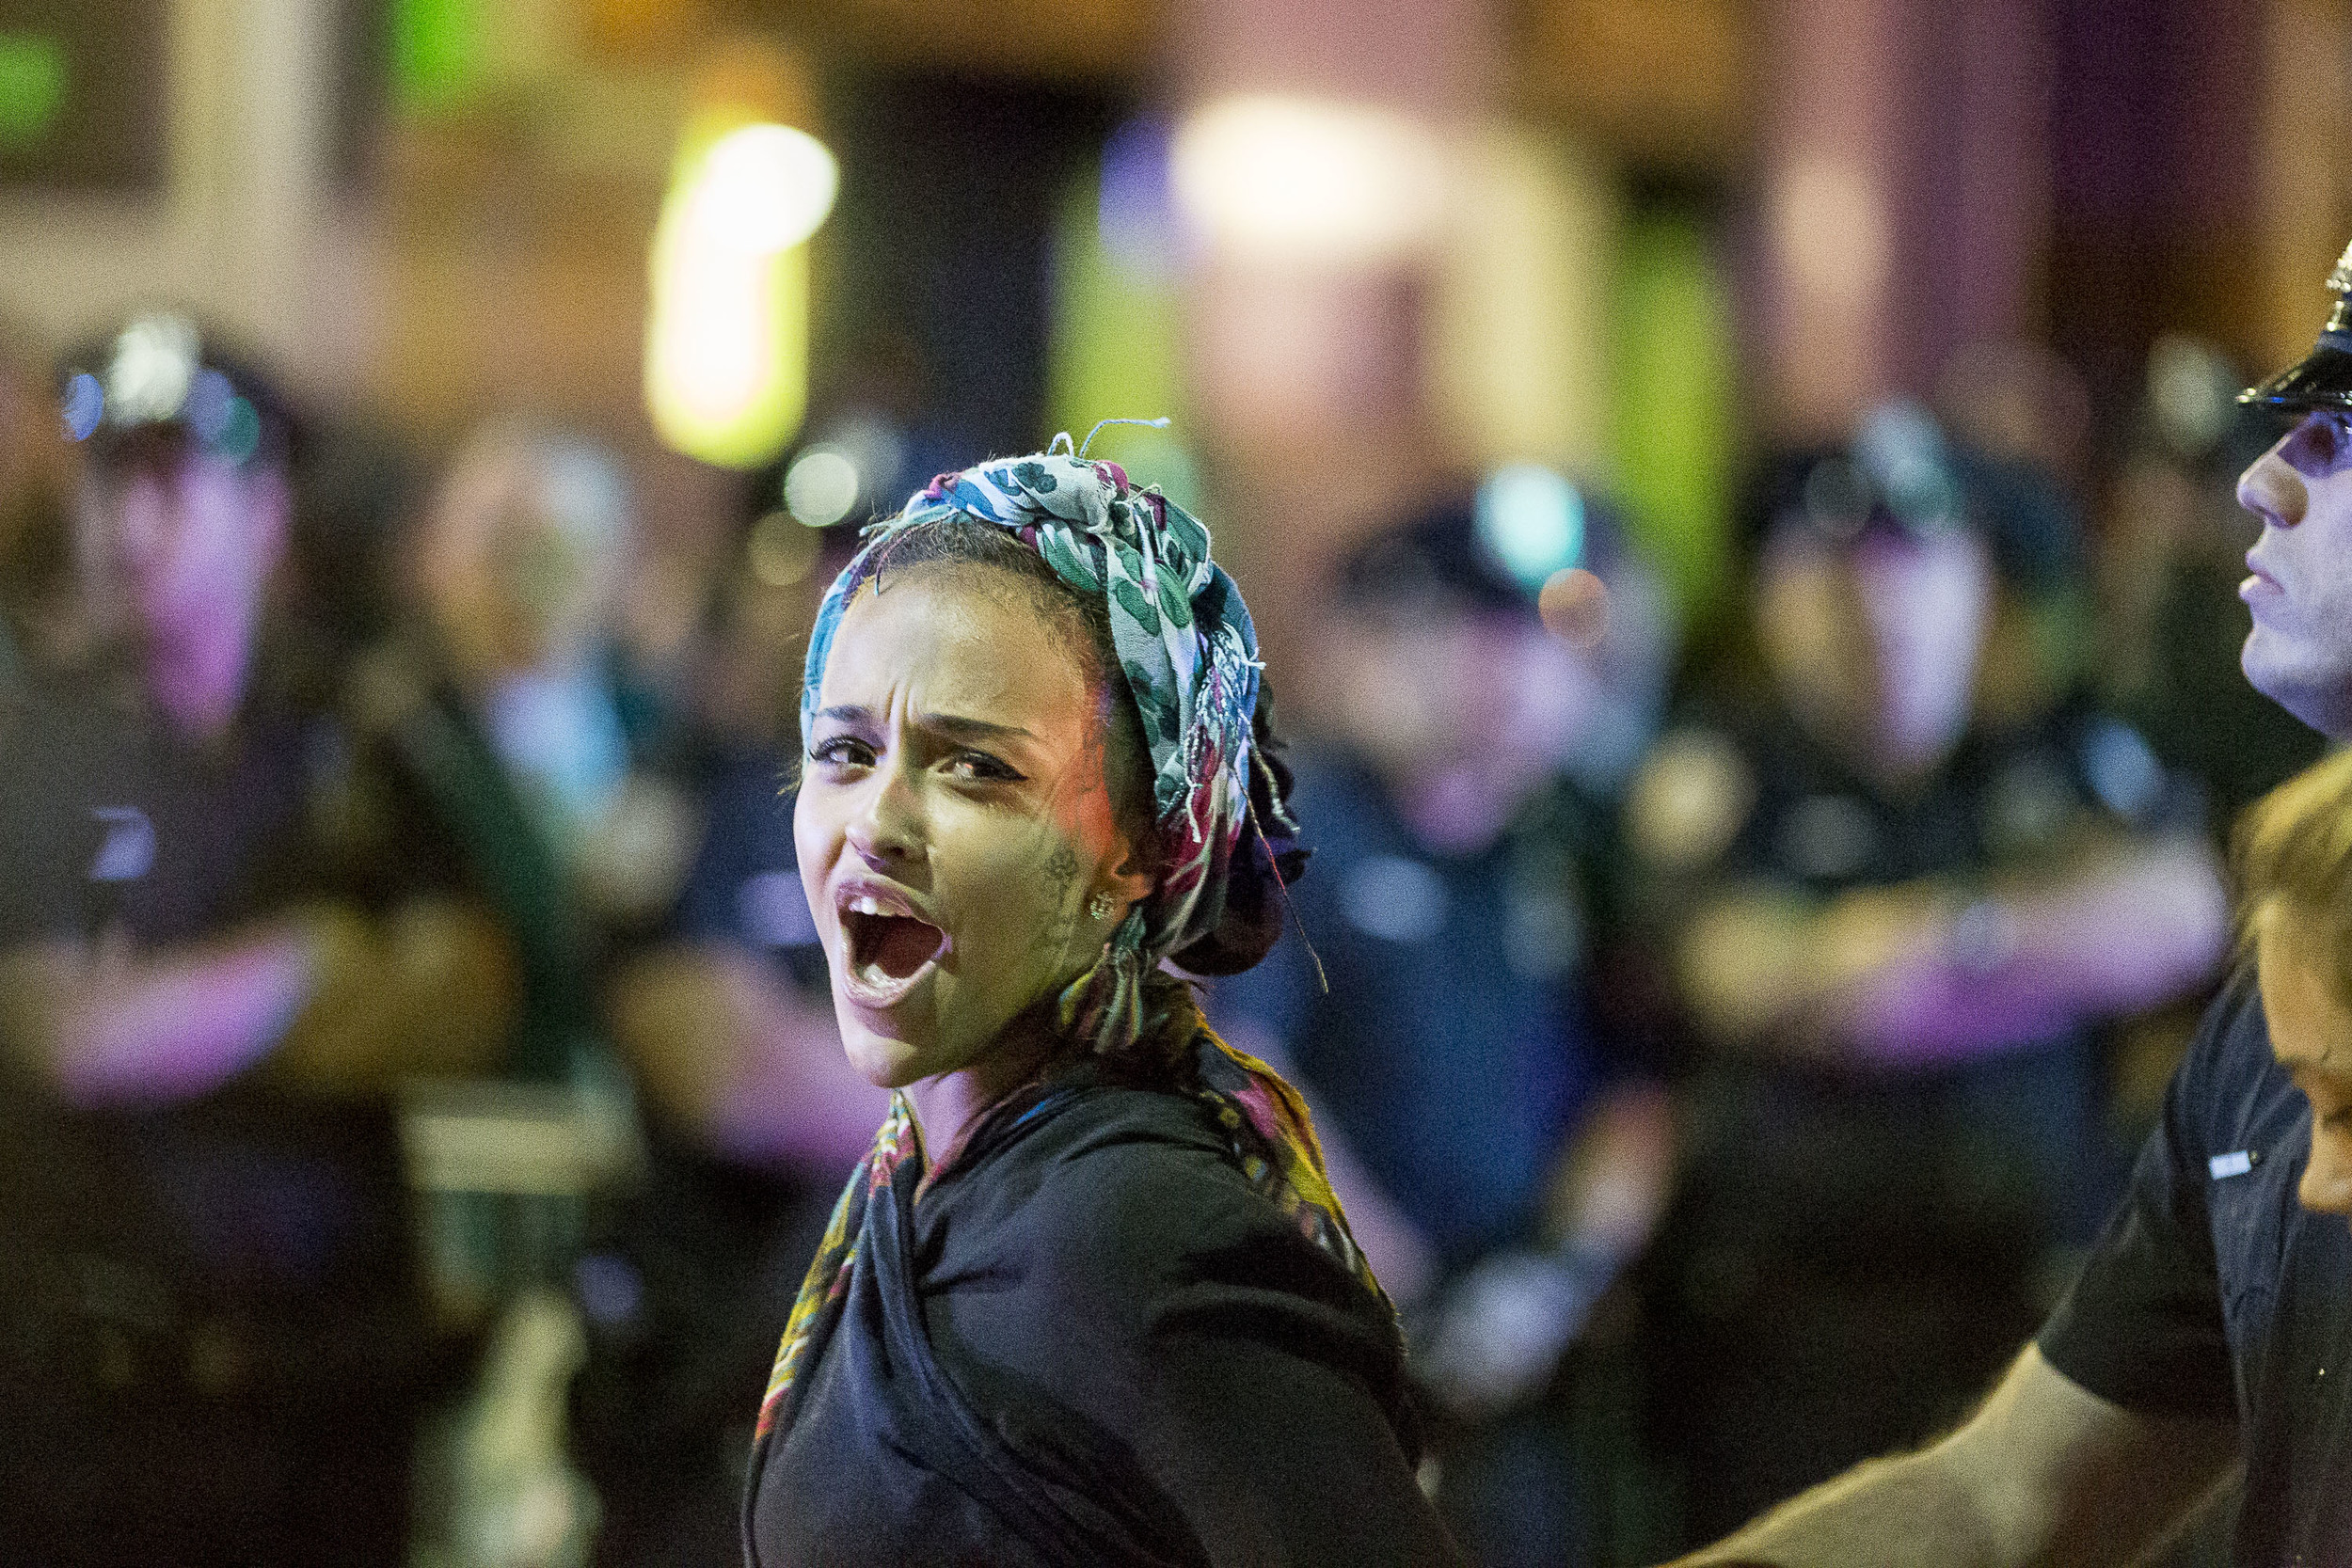  A protester responds to congratulations from friends in the crowd as she is arrested. 